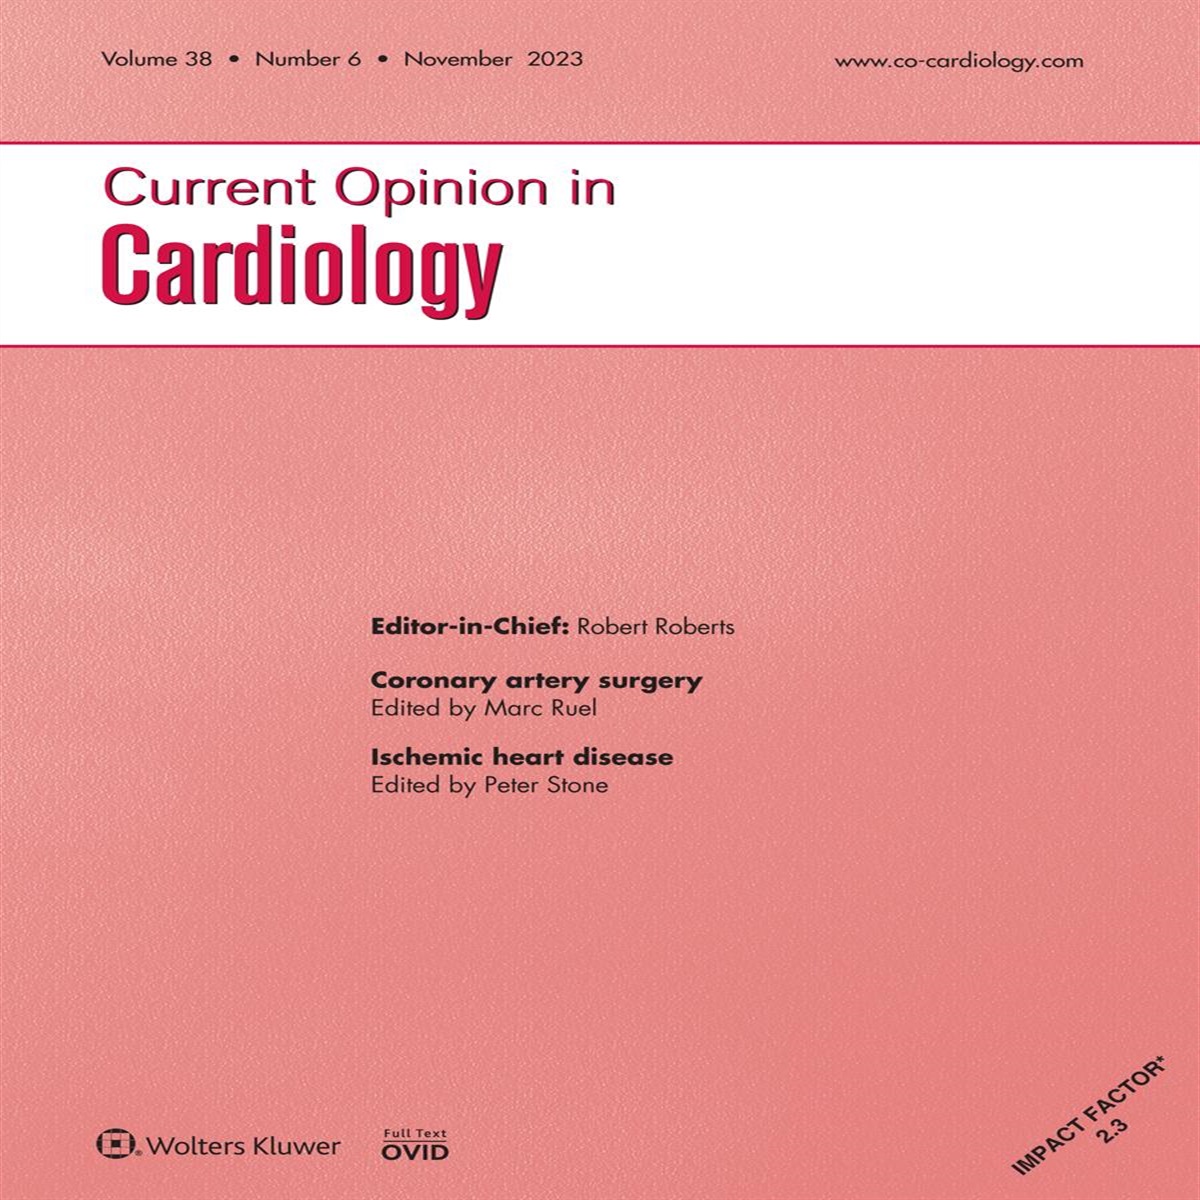 Introduction to the coronary artery surgery section